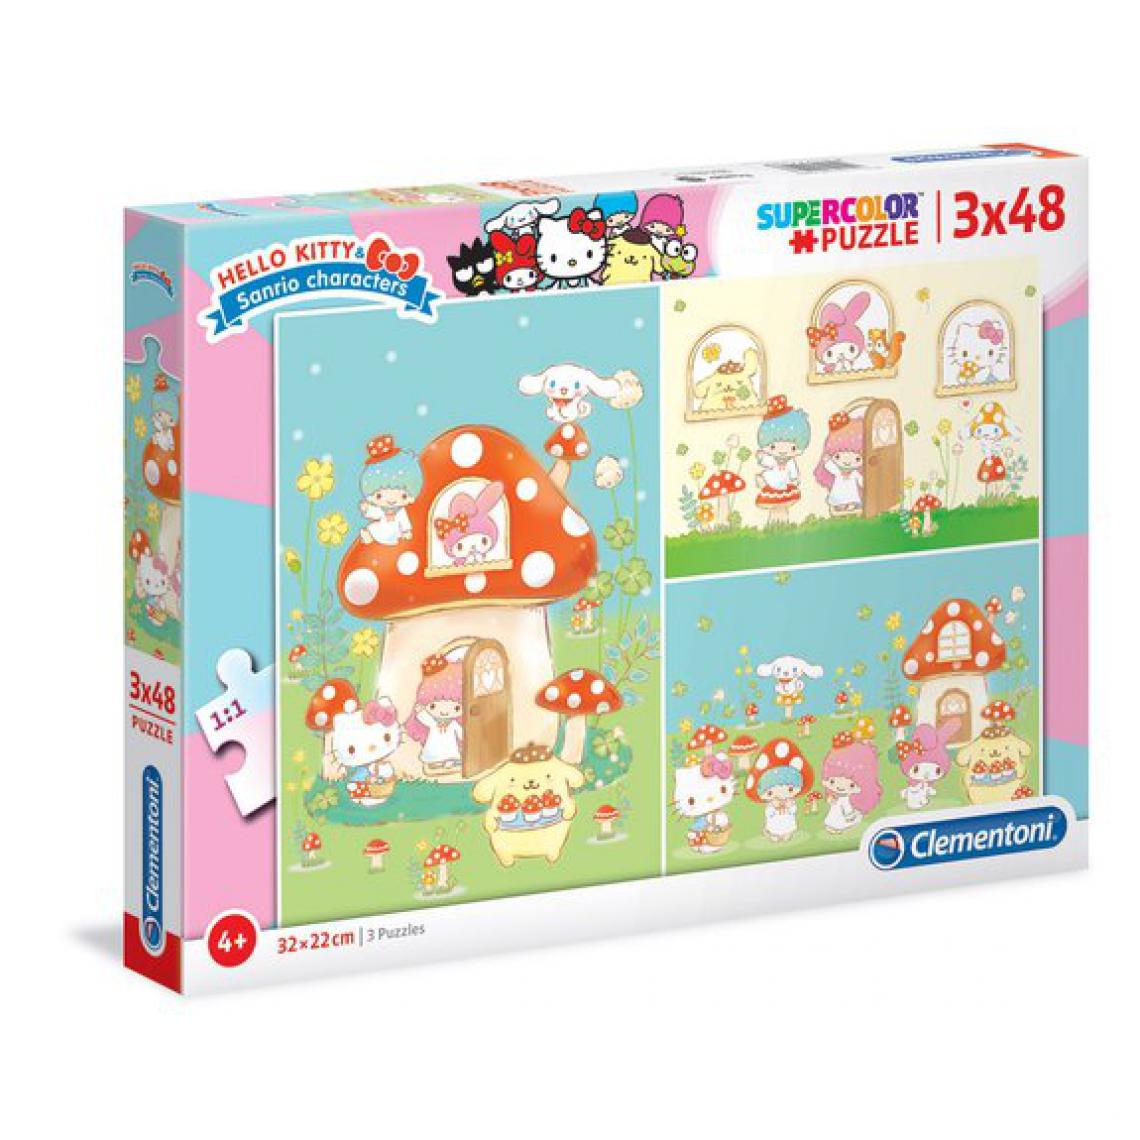 Ludendo - Puzzles SuperColor 3x48 pièces - Hello Kitty - Animaux